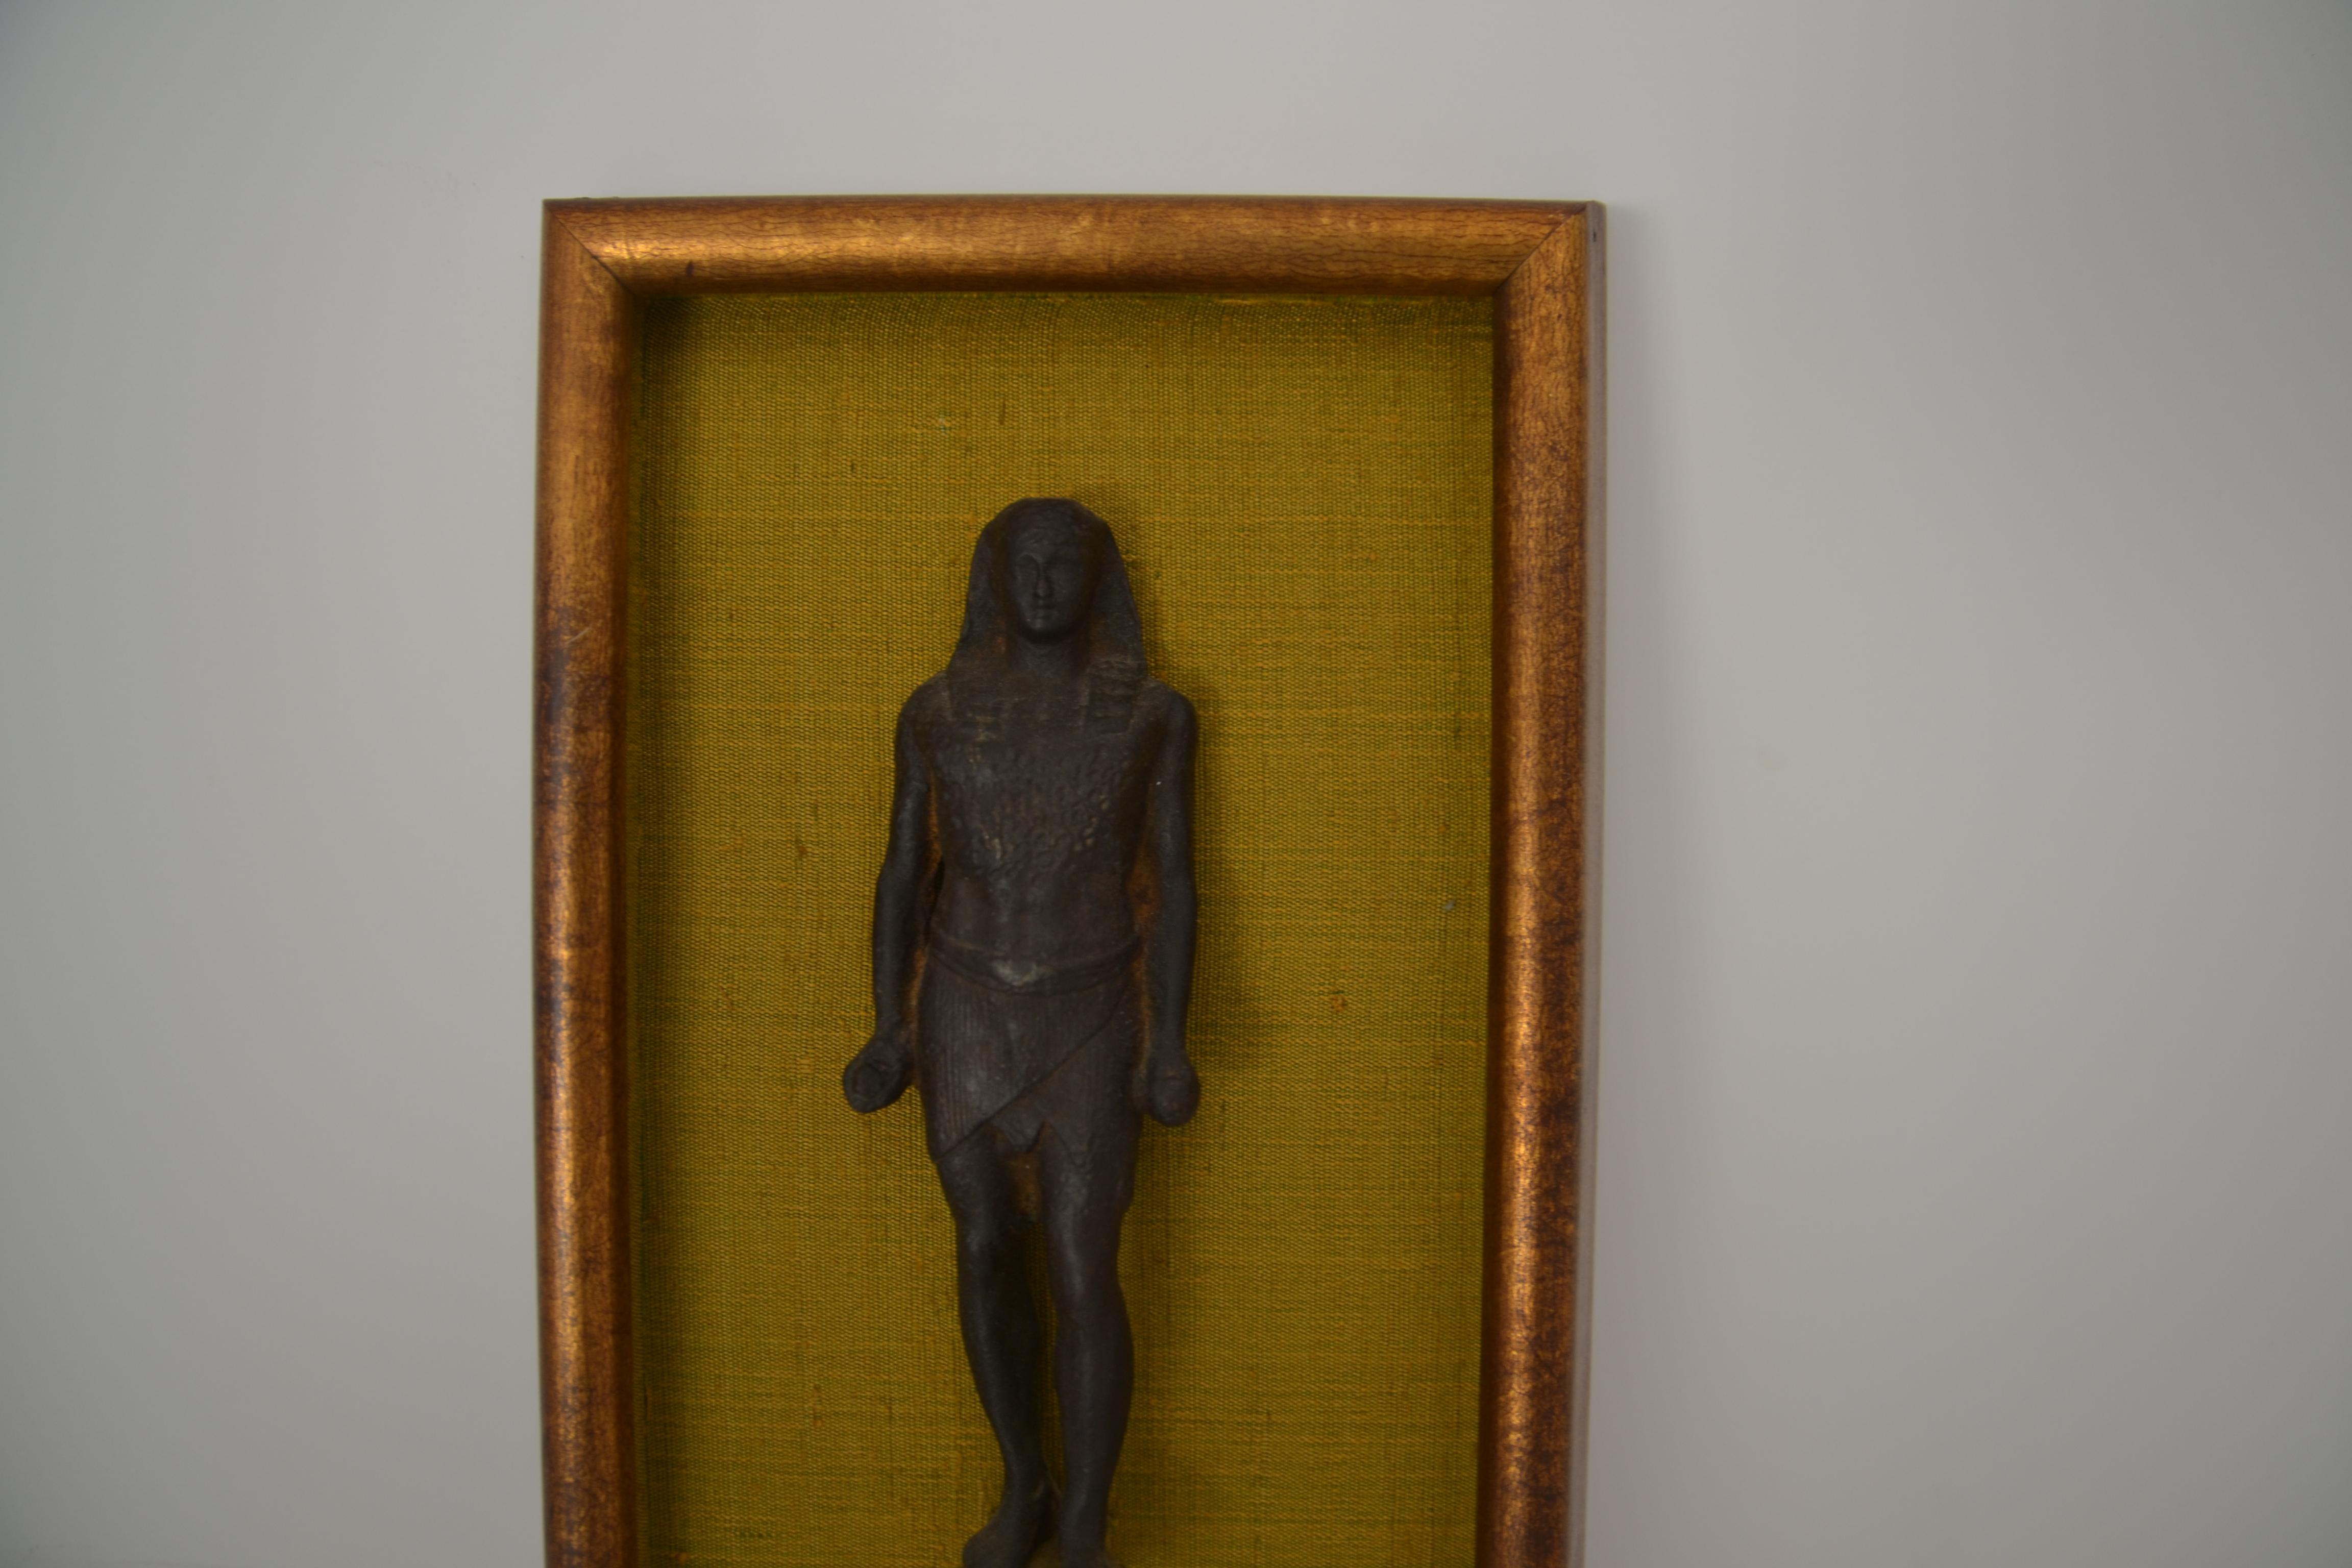 Egyptian bronze statue in a wood frame.